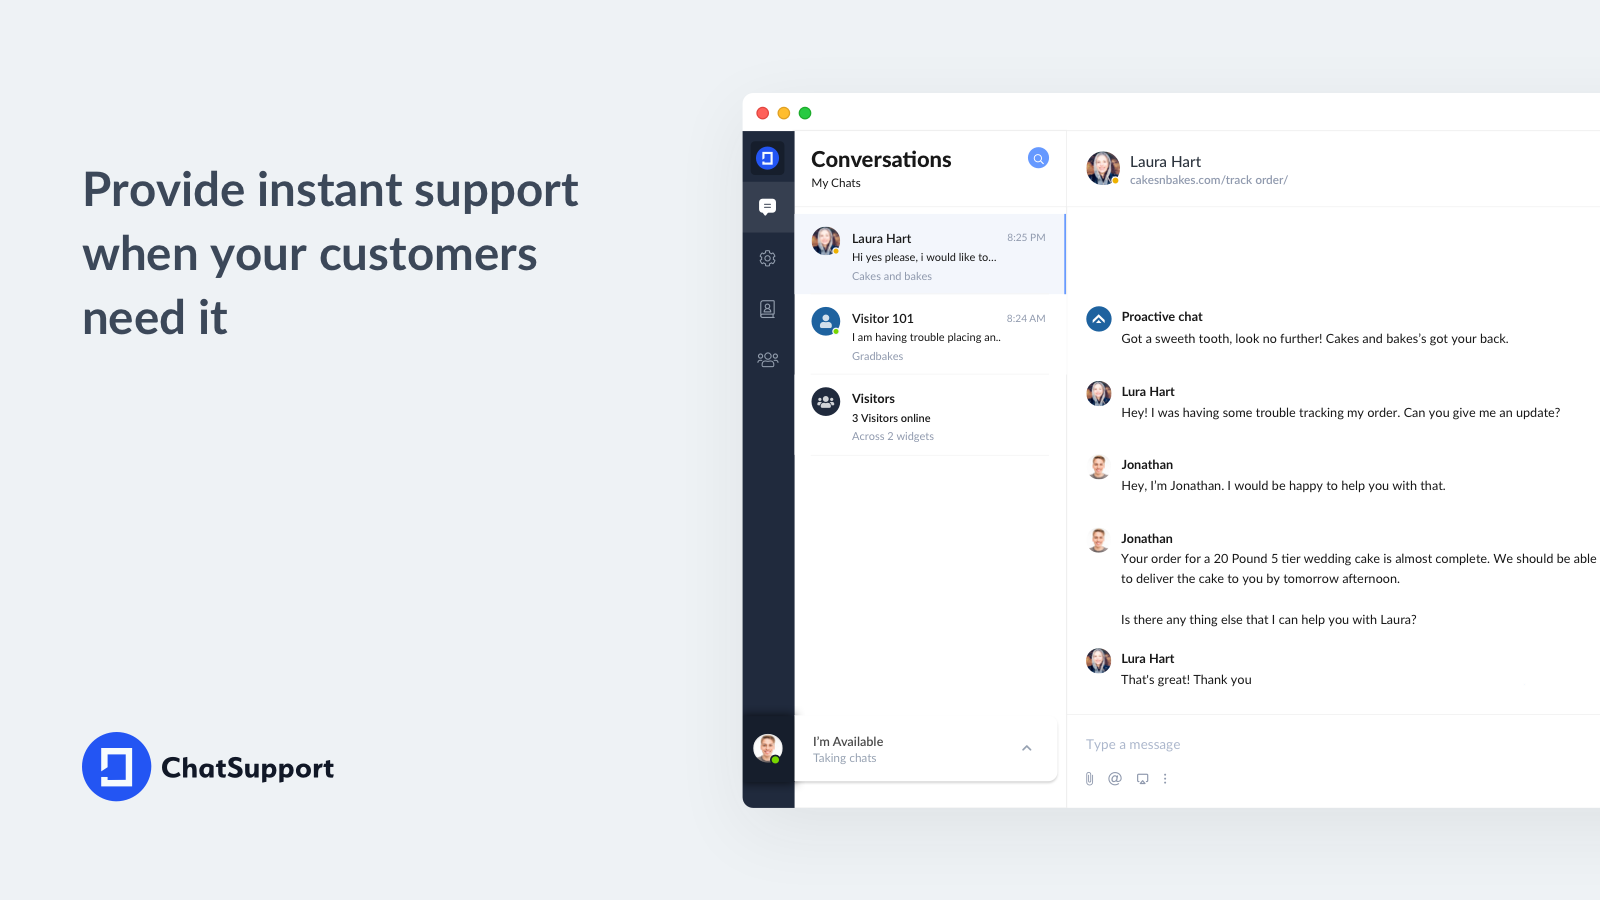 Provide instant support when your customers need it.